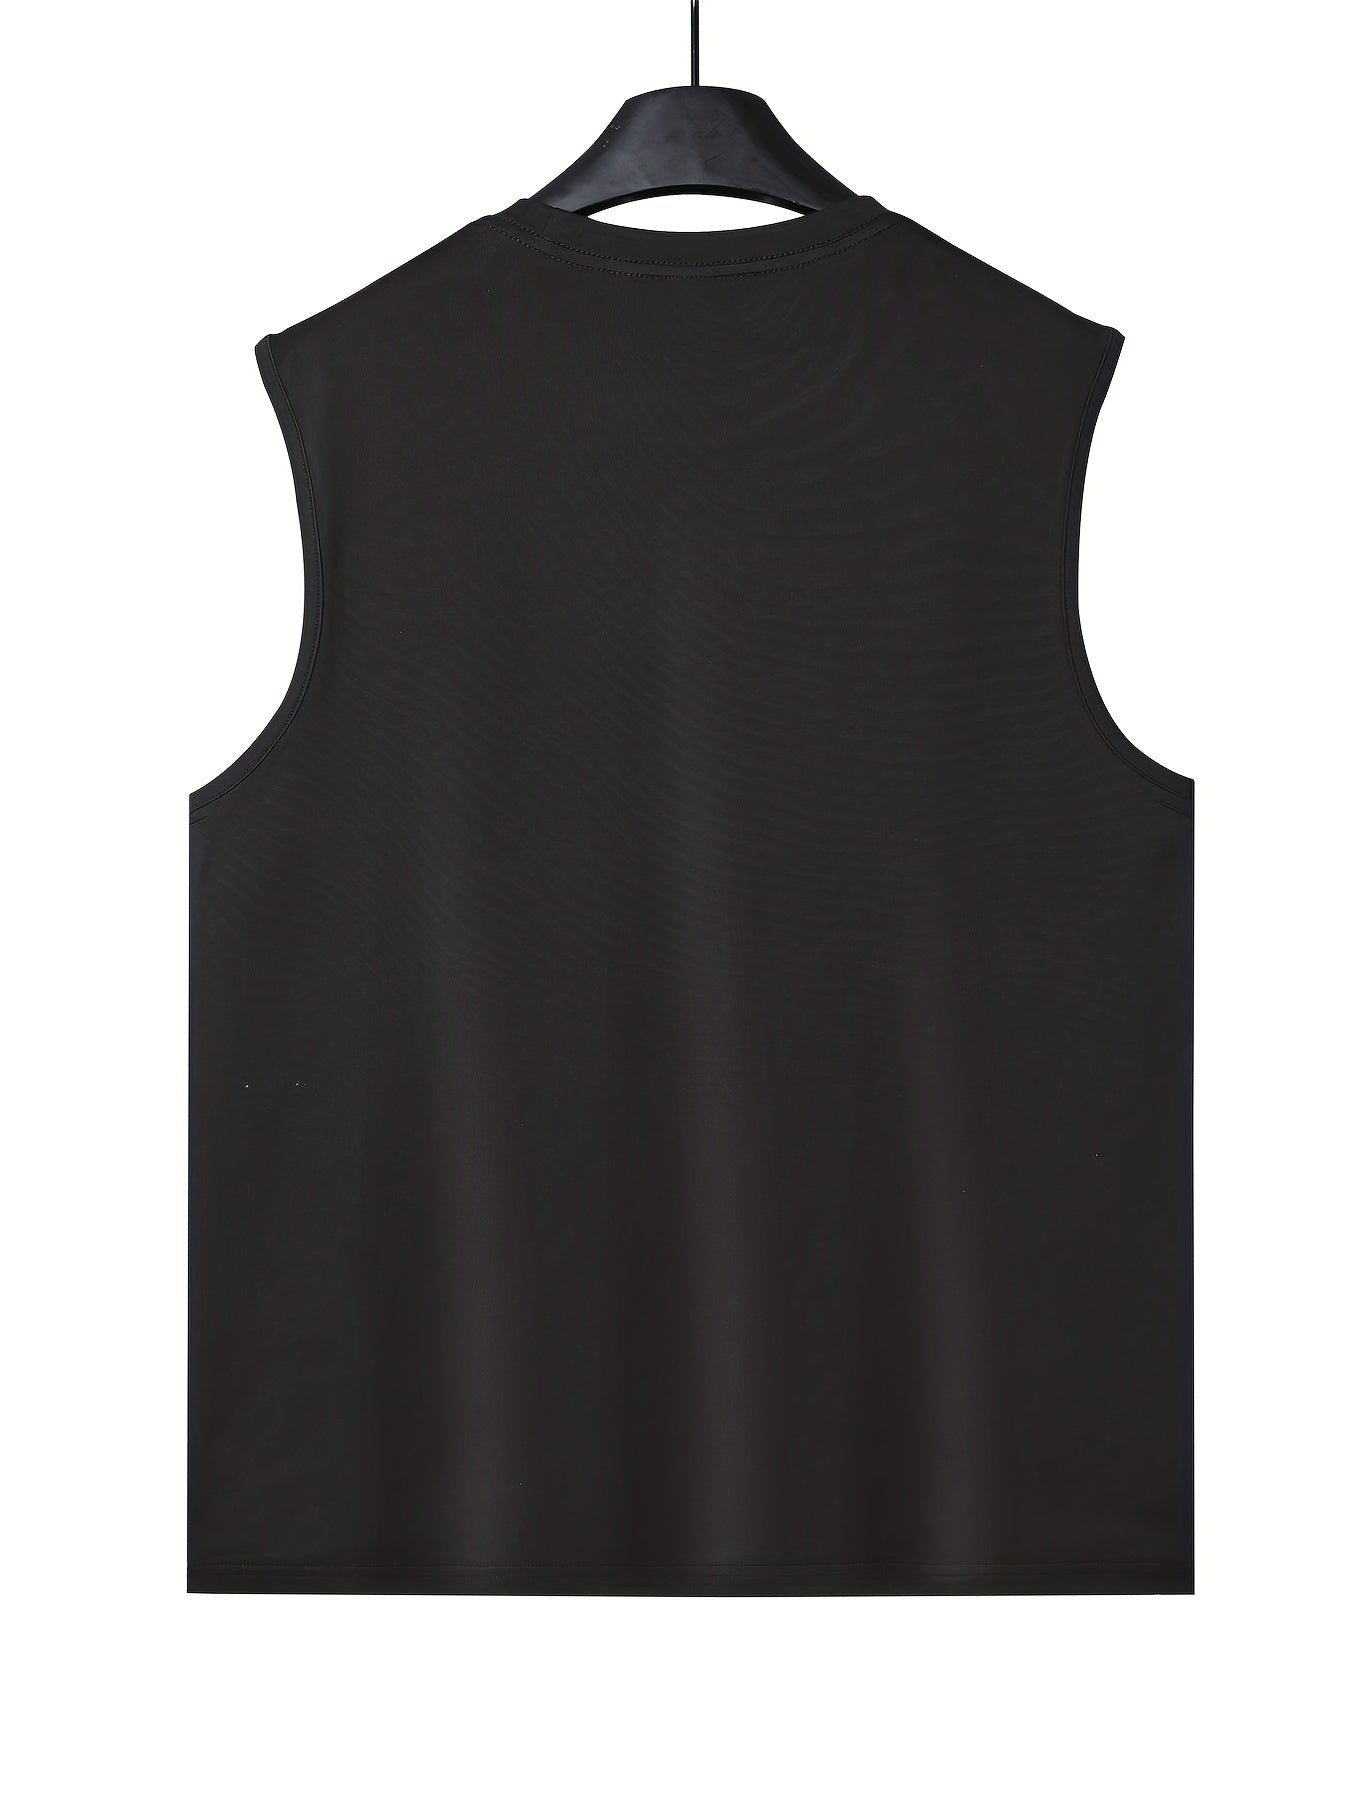 Connect To God The Password Is Prayer Men's Christian Tank Top claimedbygoddesigns